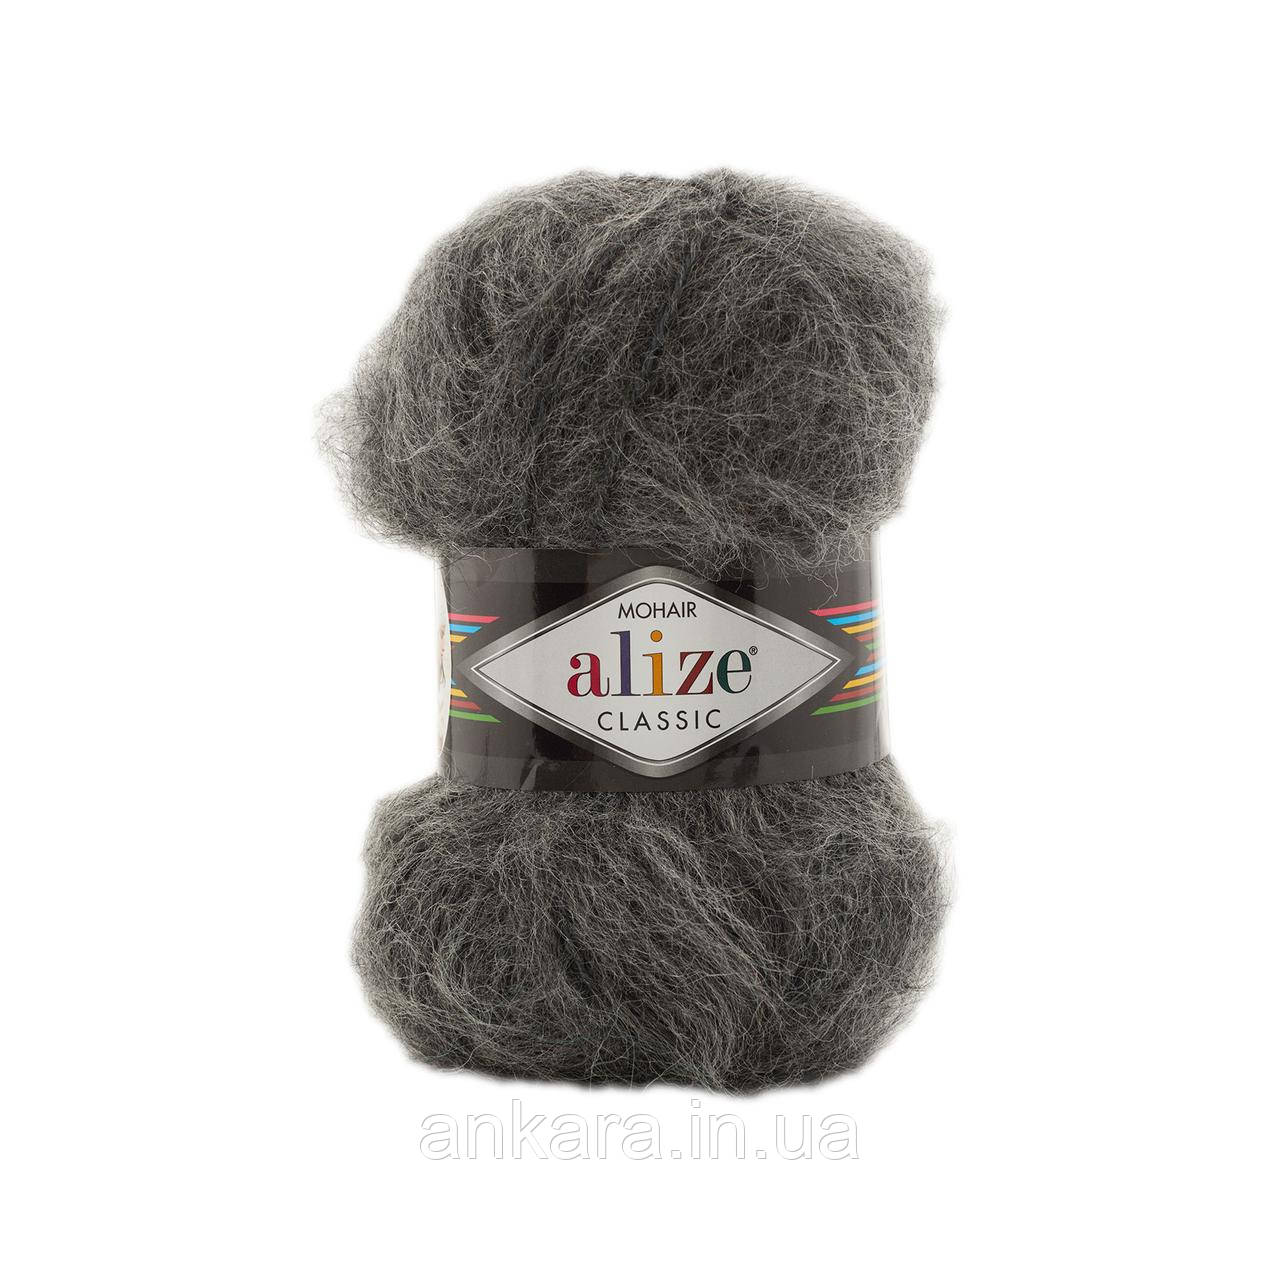 Alize Mohair Classic 196